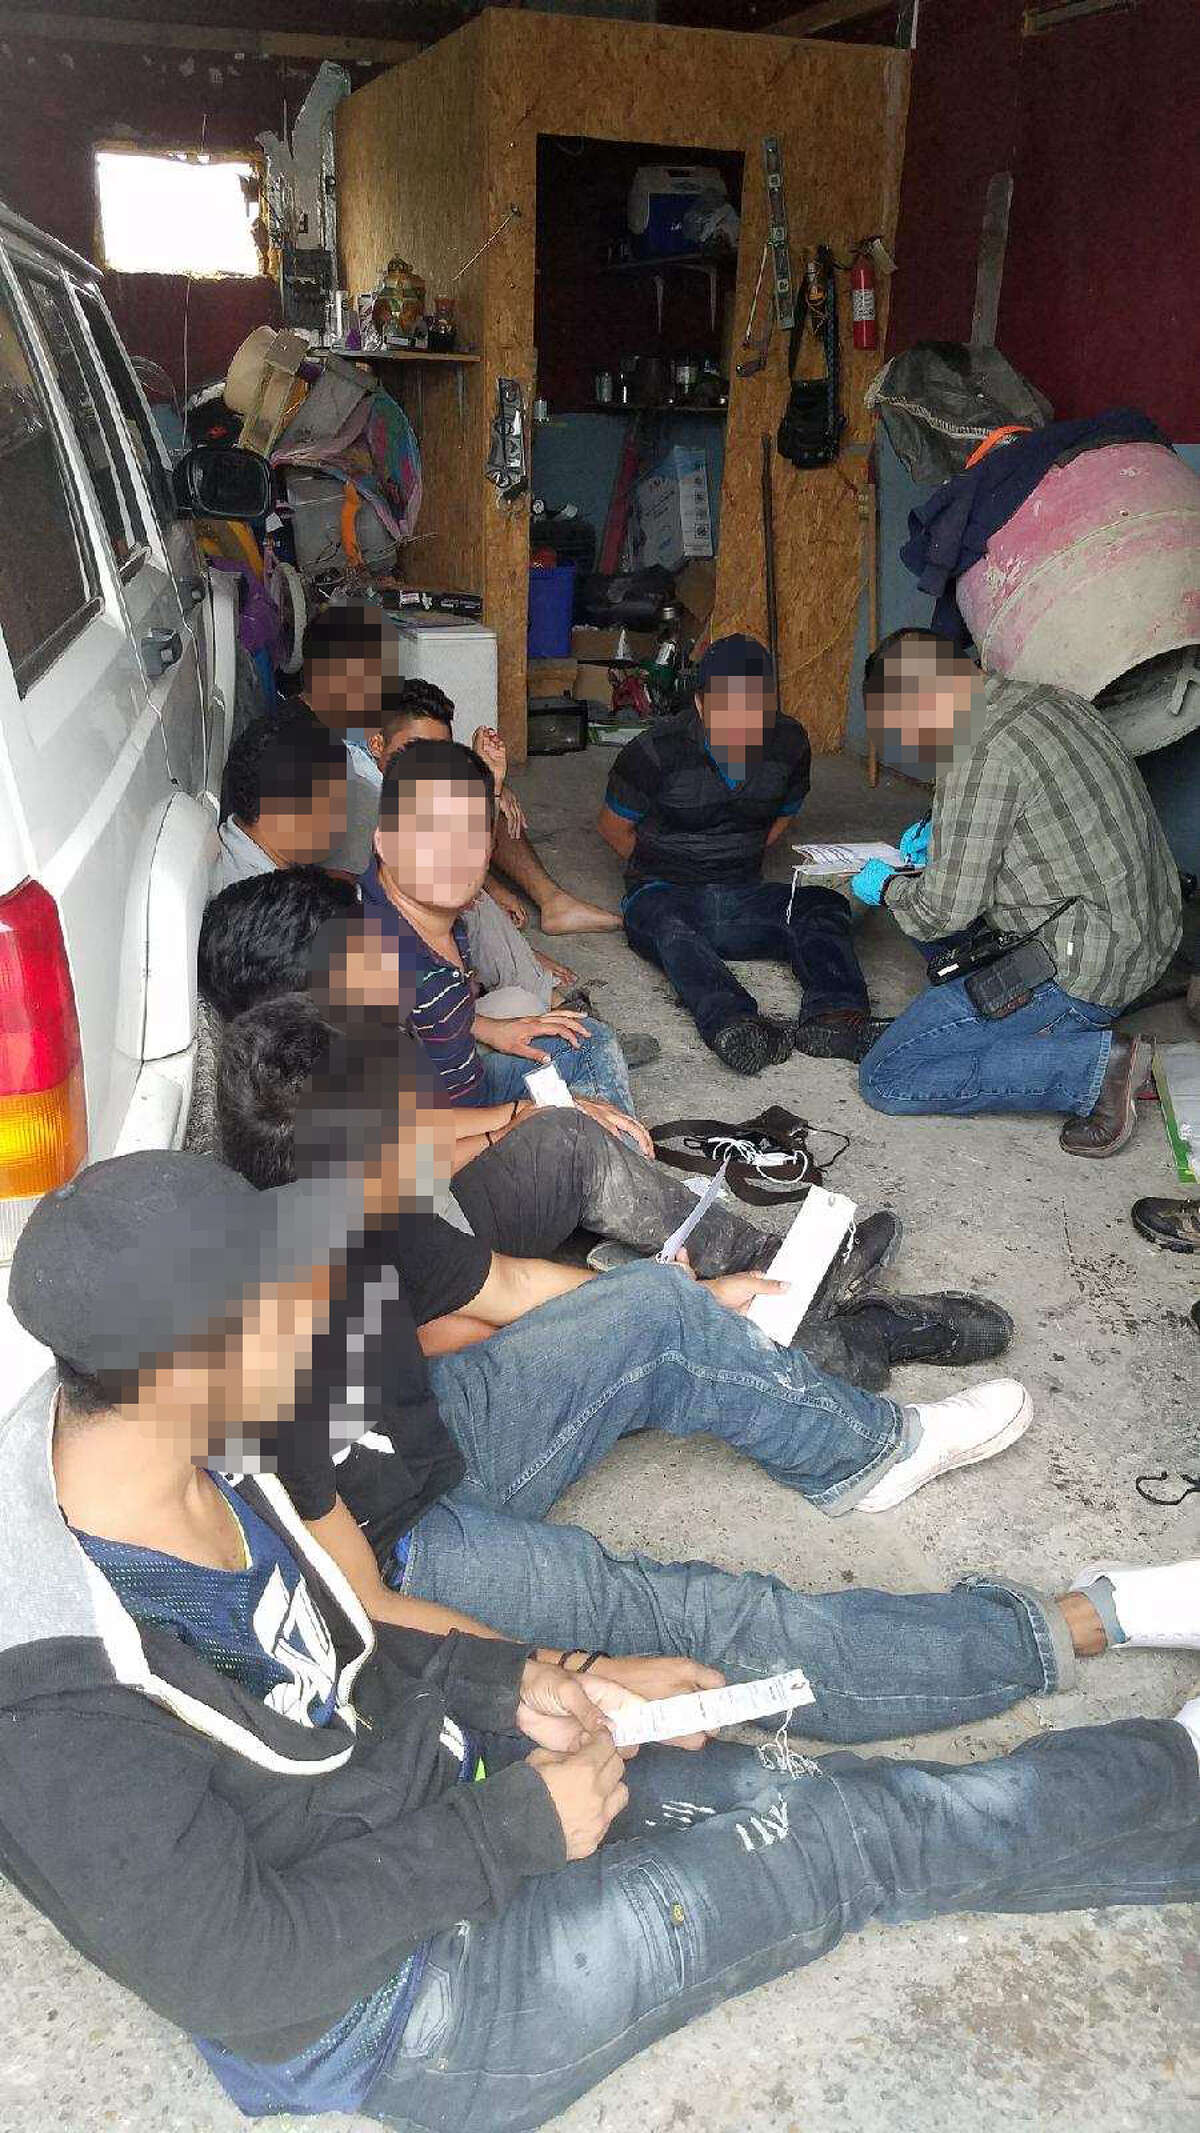 Over 50 illegal aliens were discovered in two separate stash houses within hours, federal authorities said. The apprehensions took place in Alamo, Texas and Mission, Texas on Tuesday.